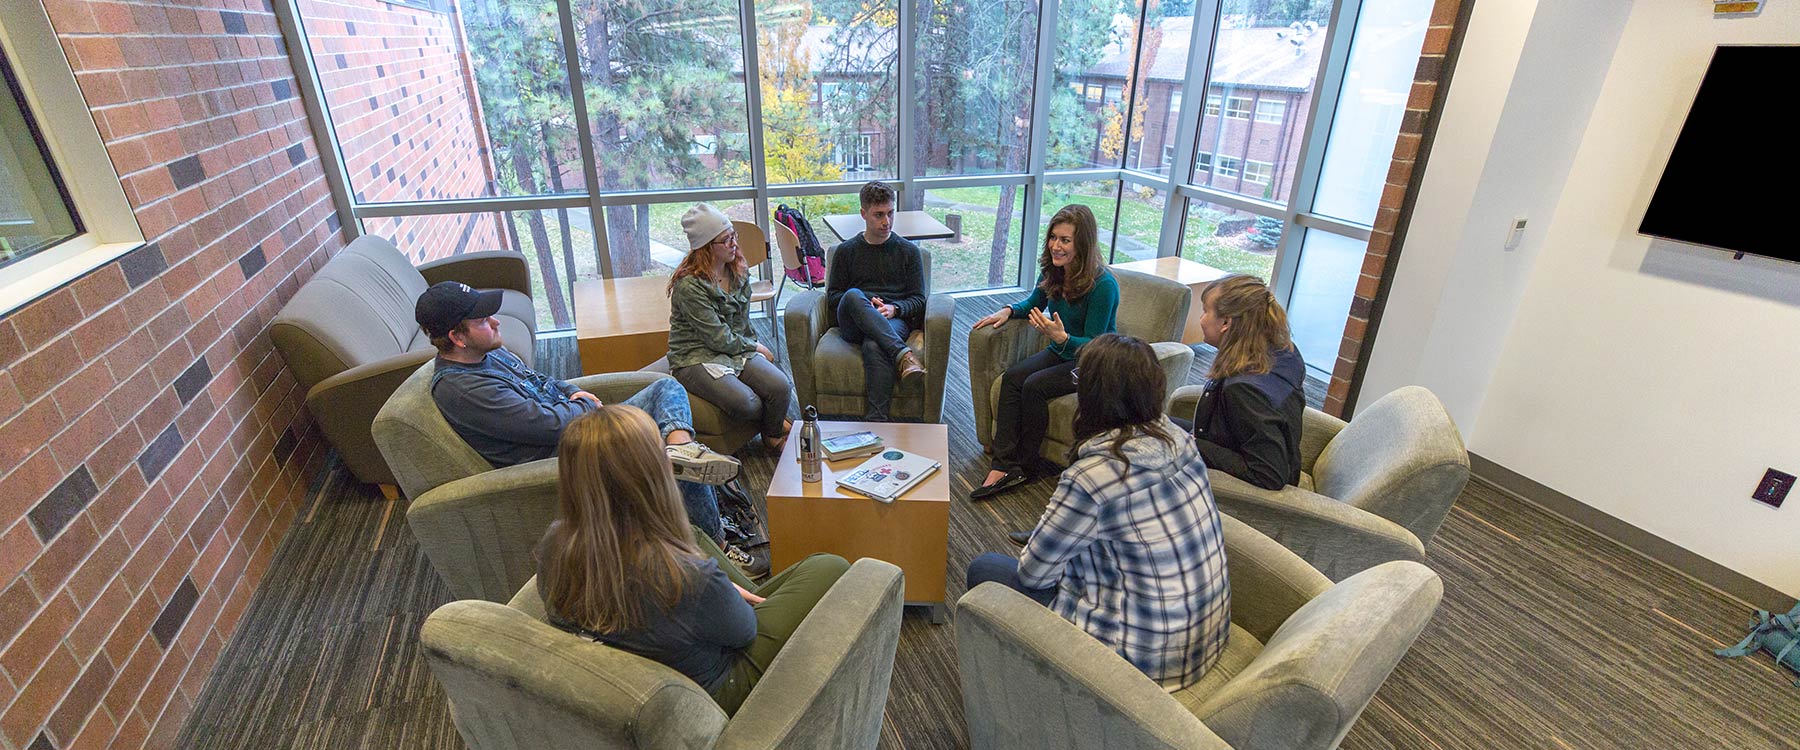 A professor sits with a group of students in a circle of armchairs near tall windows overlooking campus.